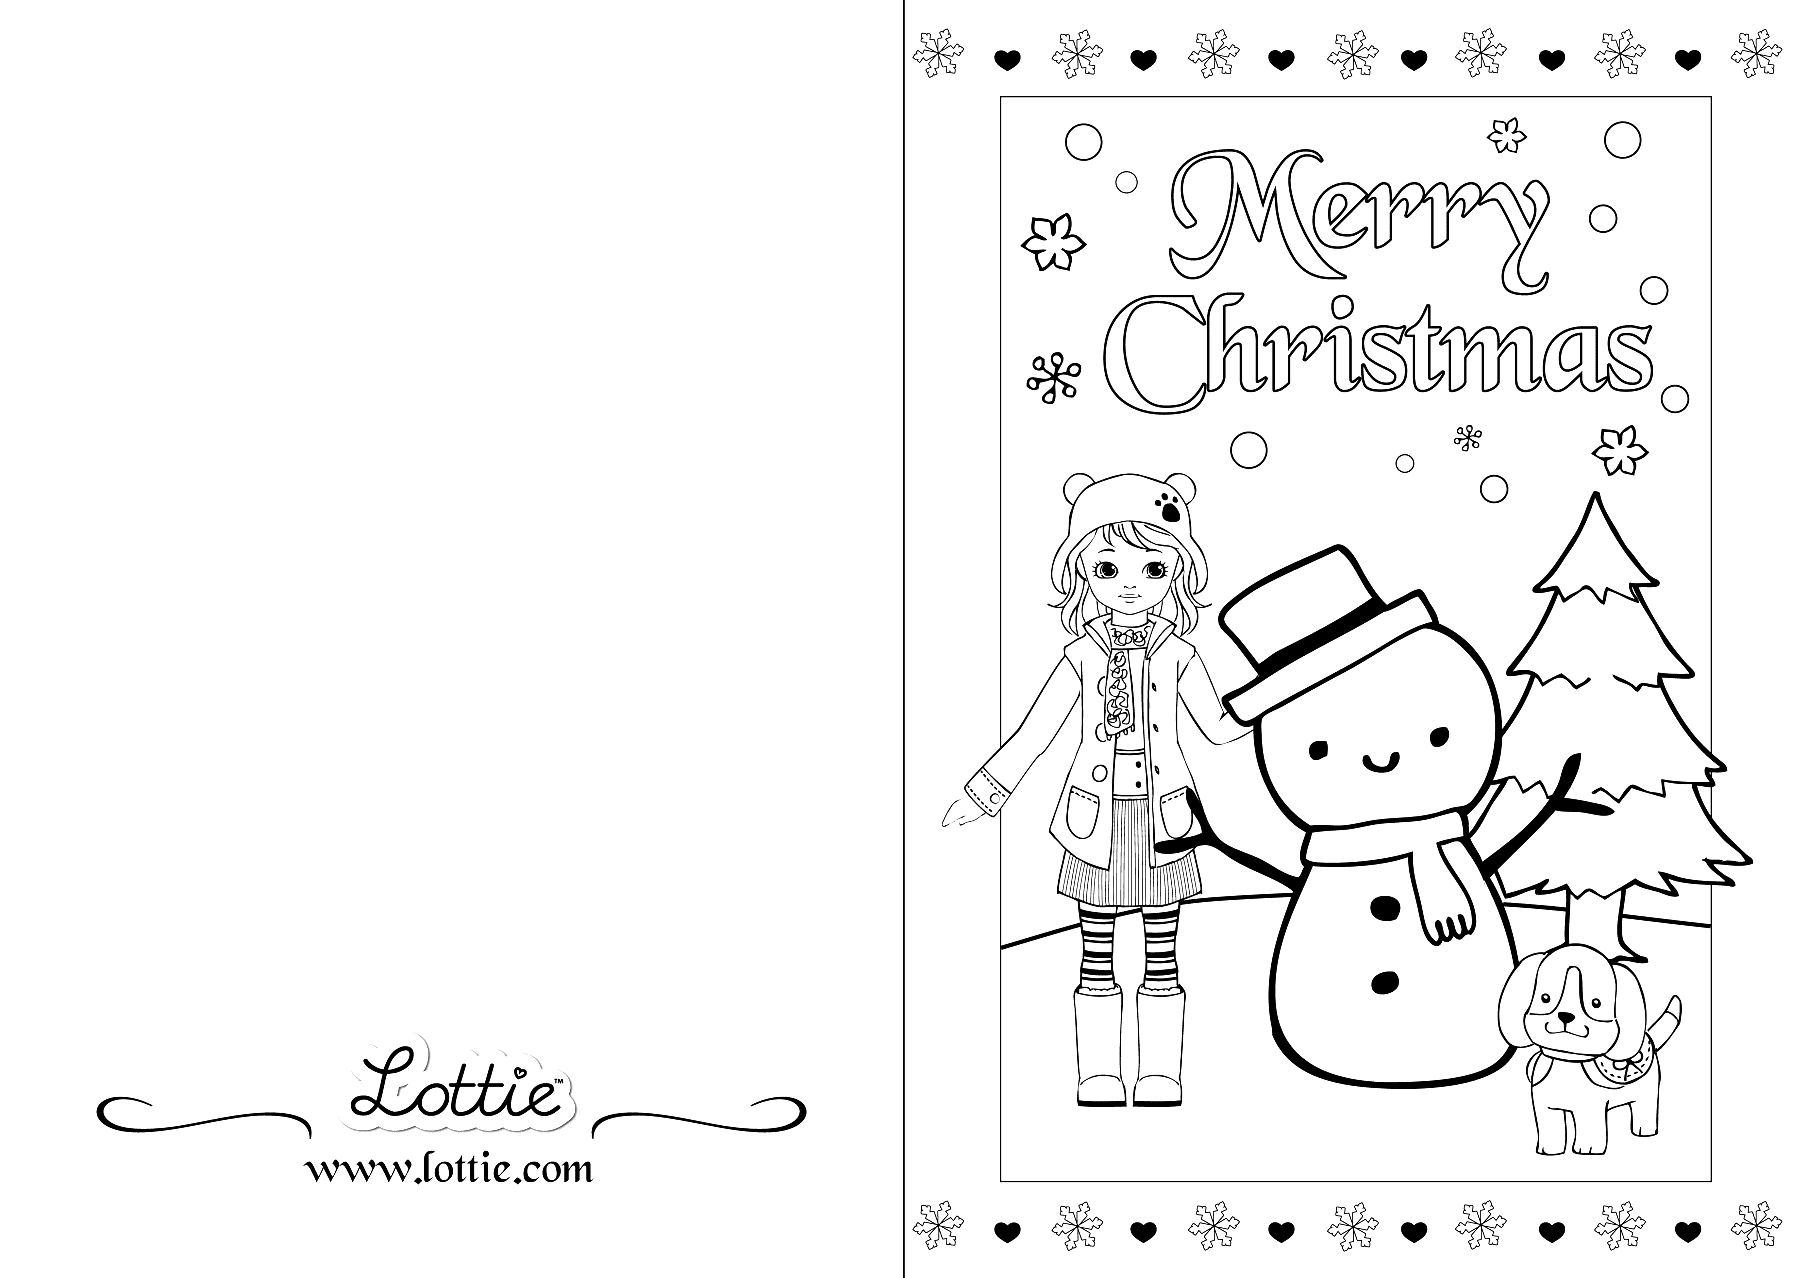 Christmas Card with Girl and Snowman Coloring Page